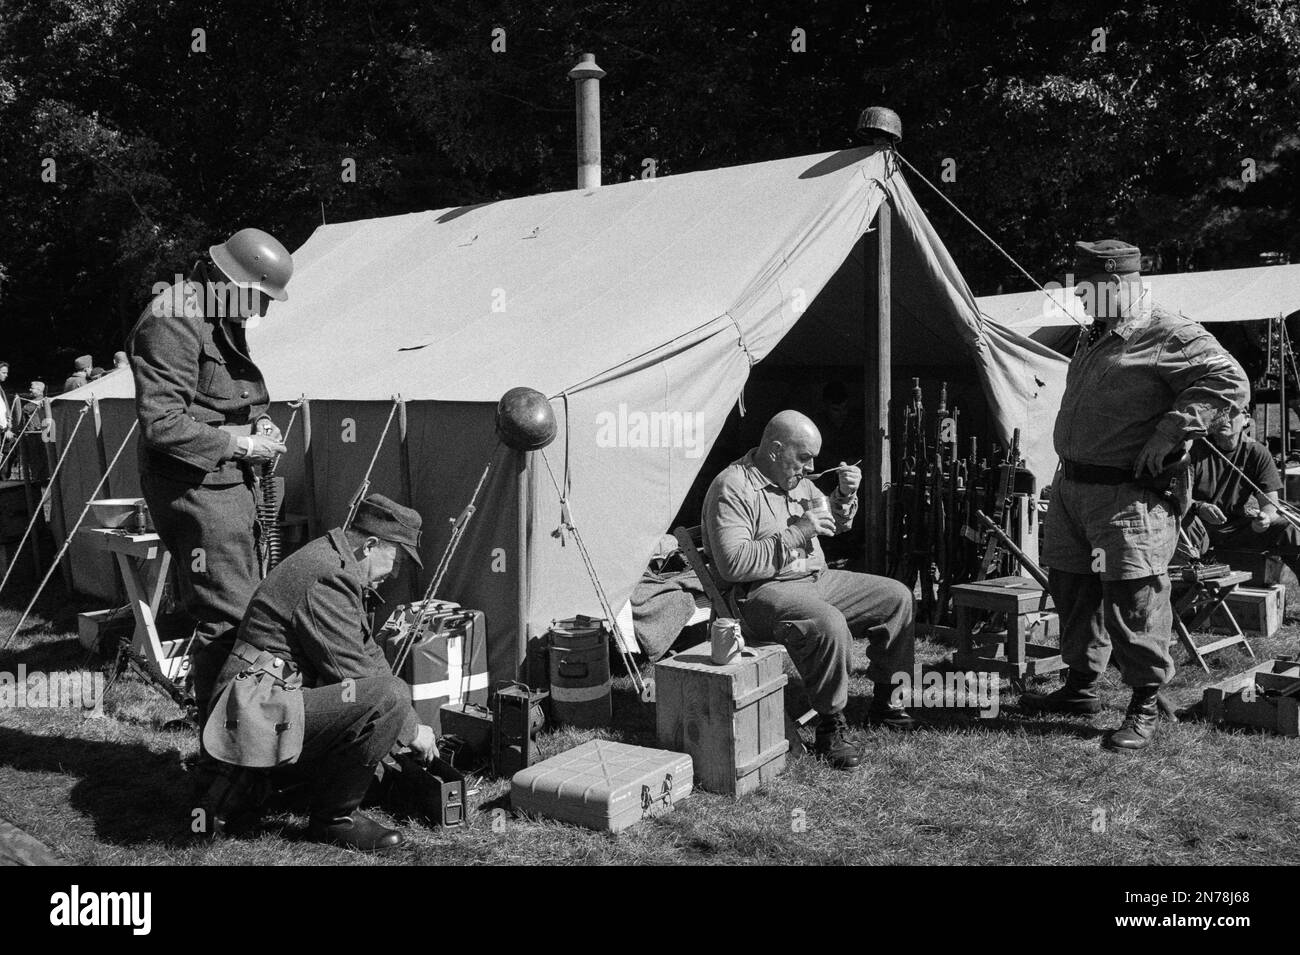 A WWII German camp with soldiers eating, working, and relaxing around a tent during a reenactment at the American Heritage Museum. The image was captu Stock Photo